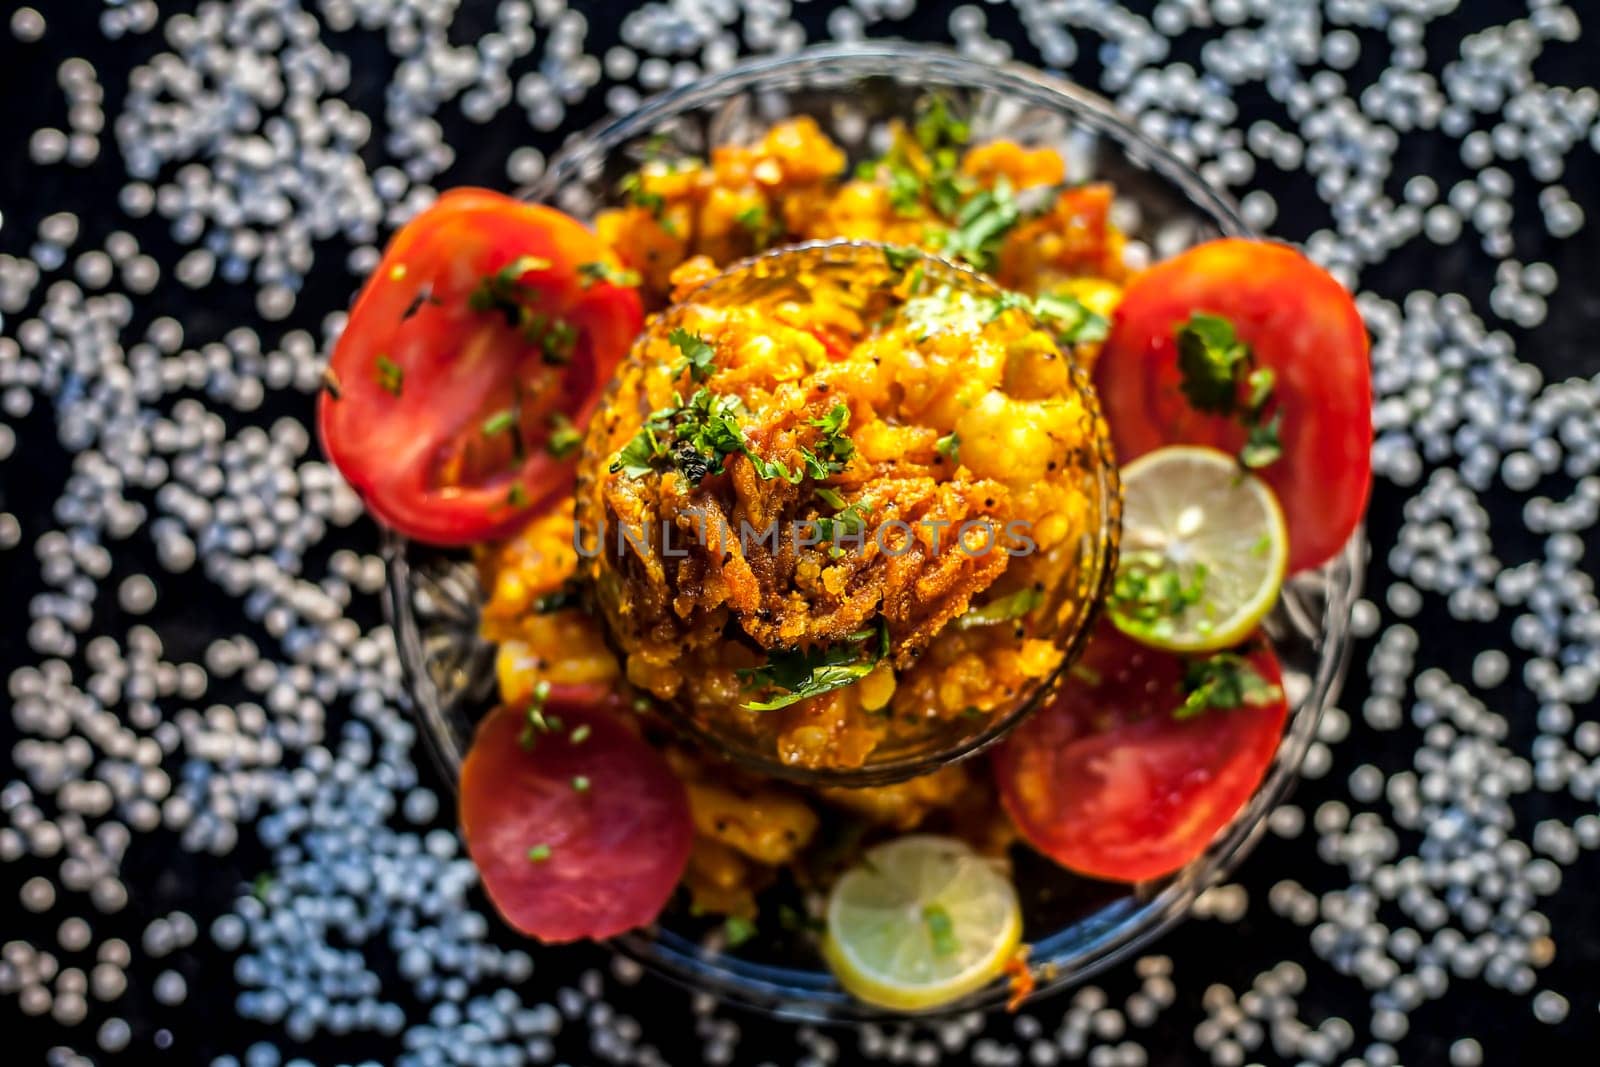 Close-up shot of spicy tasty sabudana khichdi or sago ball khichdi along with some sliced tomatoes, some cut lemons in a glass plate, and raw sago balls.